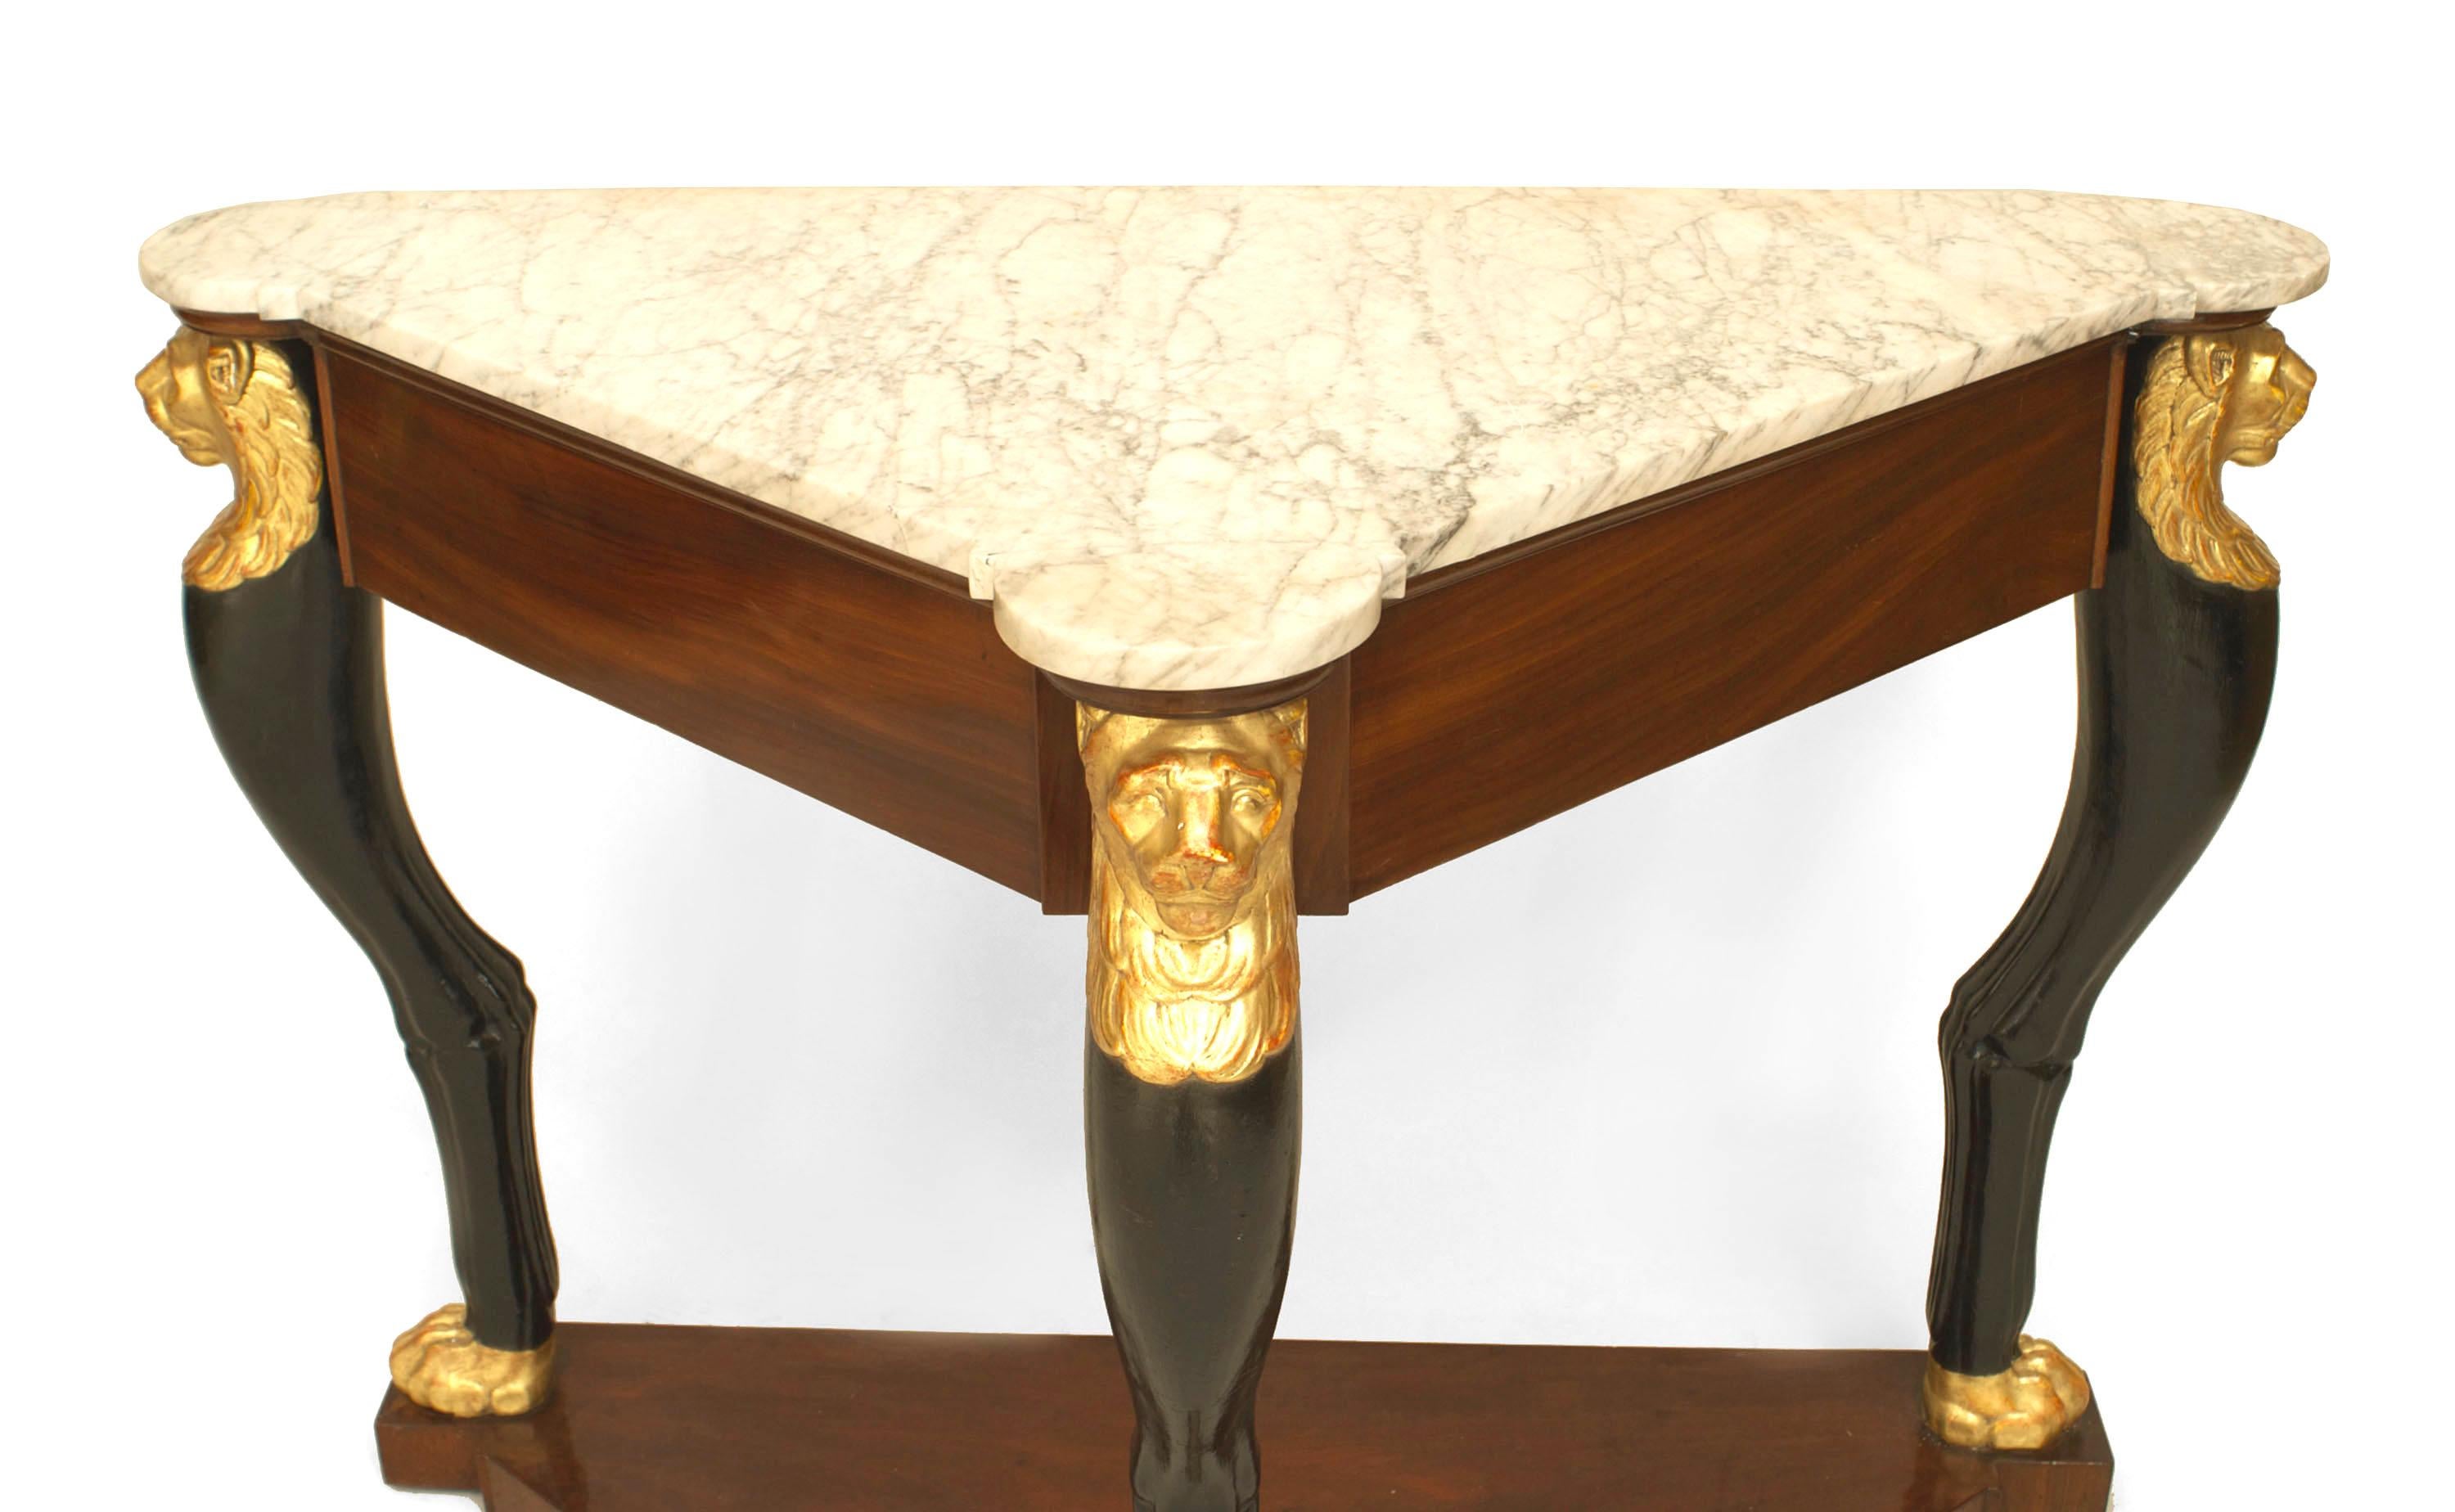 French Empire triangular shaped mahogany console table with 3 ebonized and gilt lion head legs with claw feet resting on a platform base under a white marble (top stamped JACOB-D-/R-MESLEE)